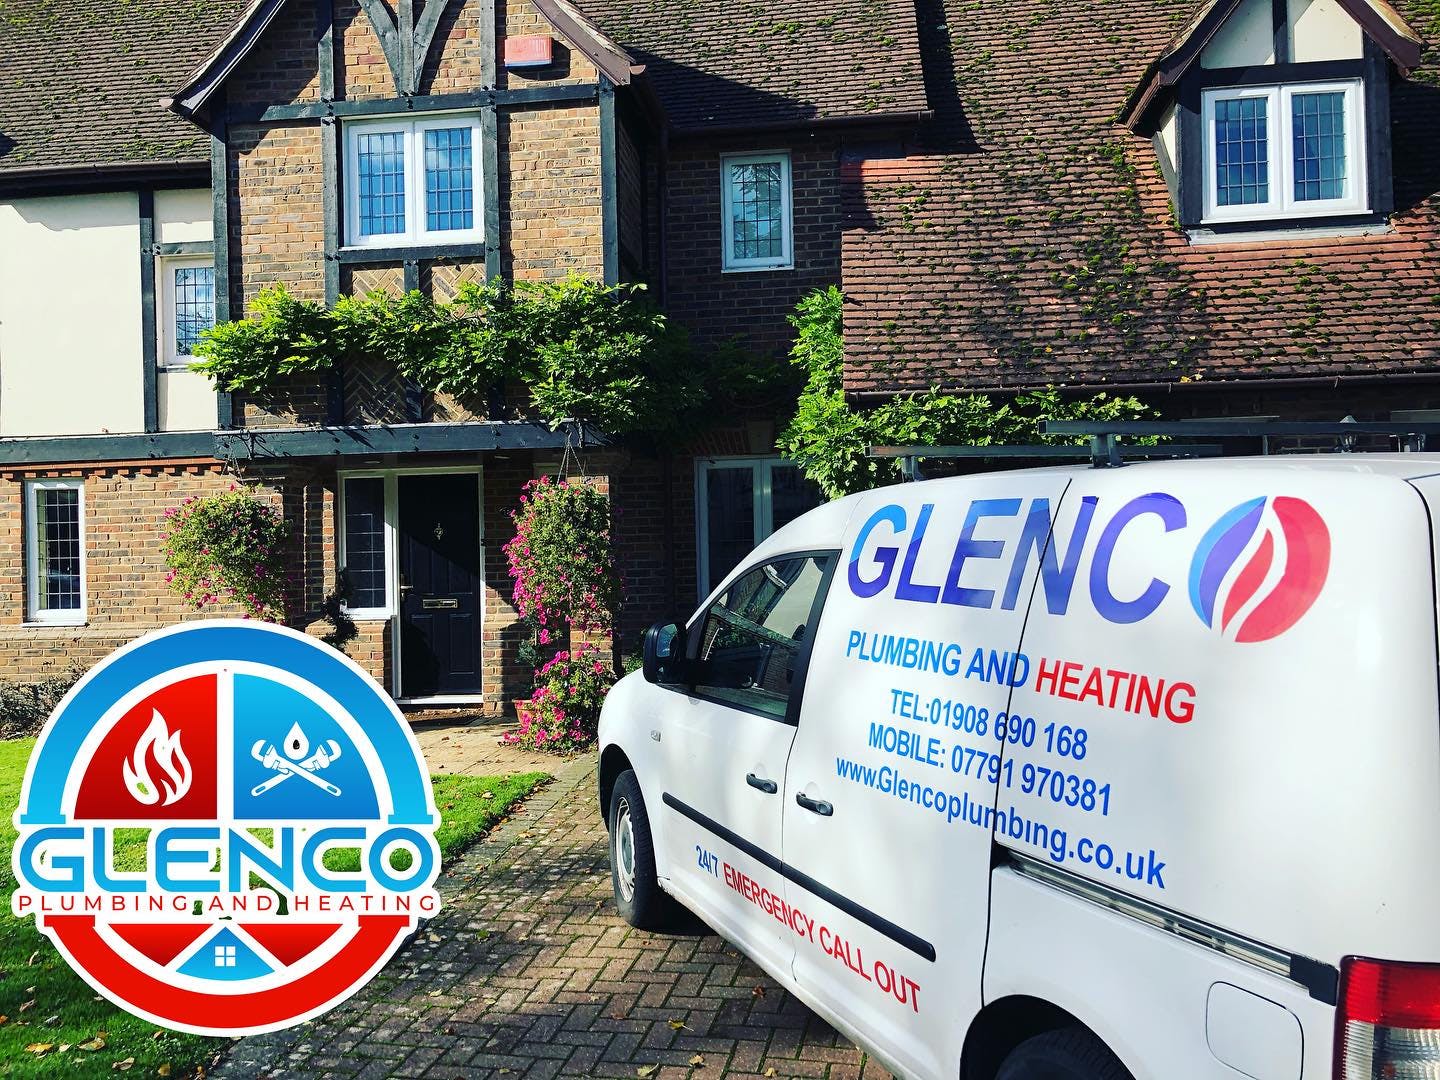 Plumbing And Heating Services 24/7